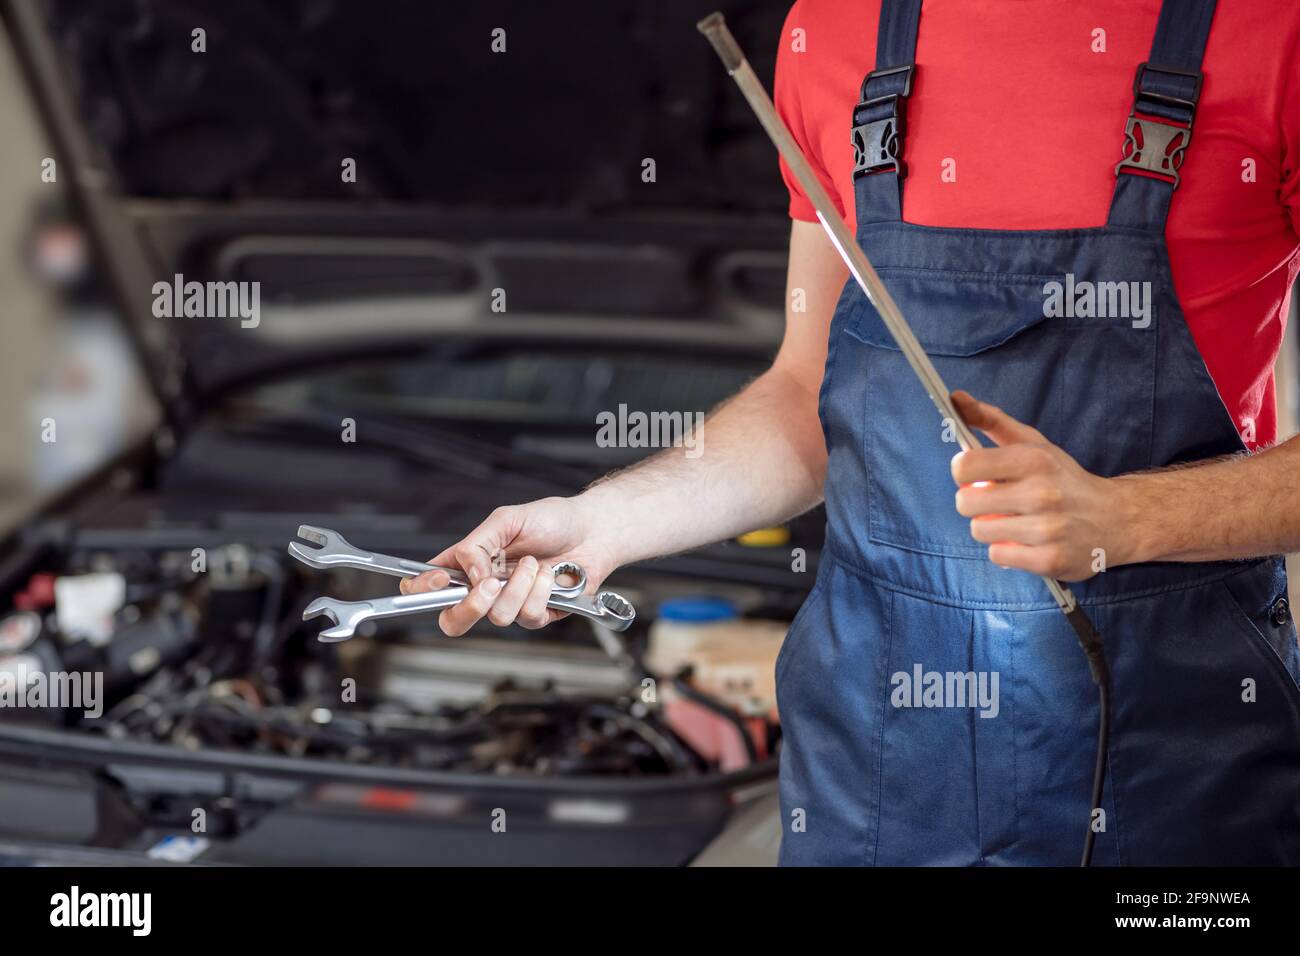 Auto mechanic hands with wrenches and lamp Stock Photo